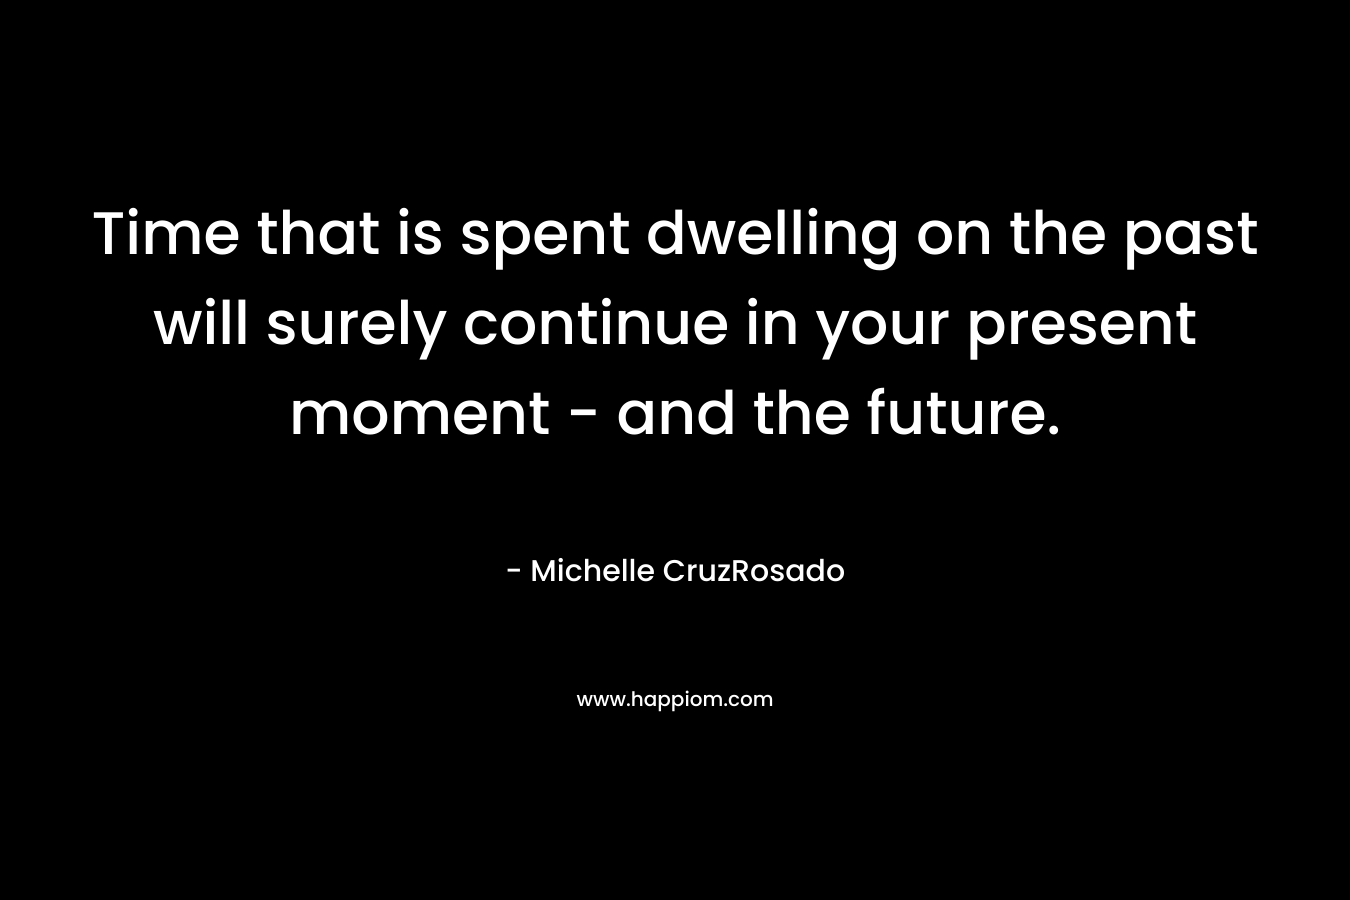 Time that is spent dwelling on the past will surely continue in your present moment - and the future.